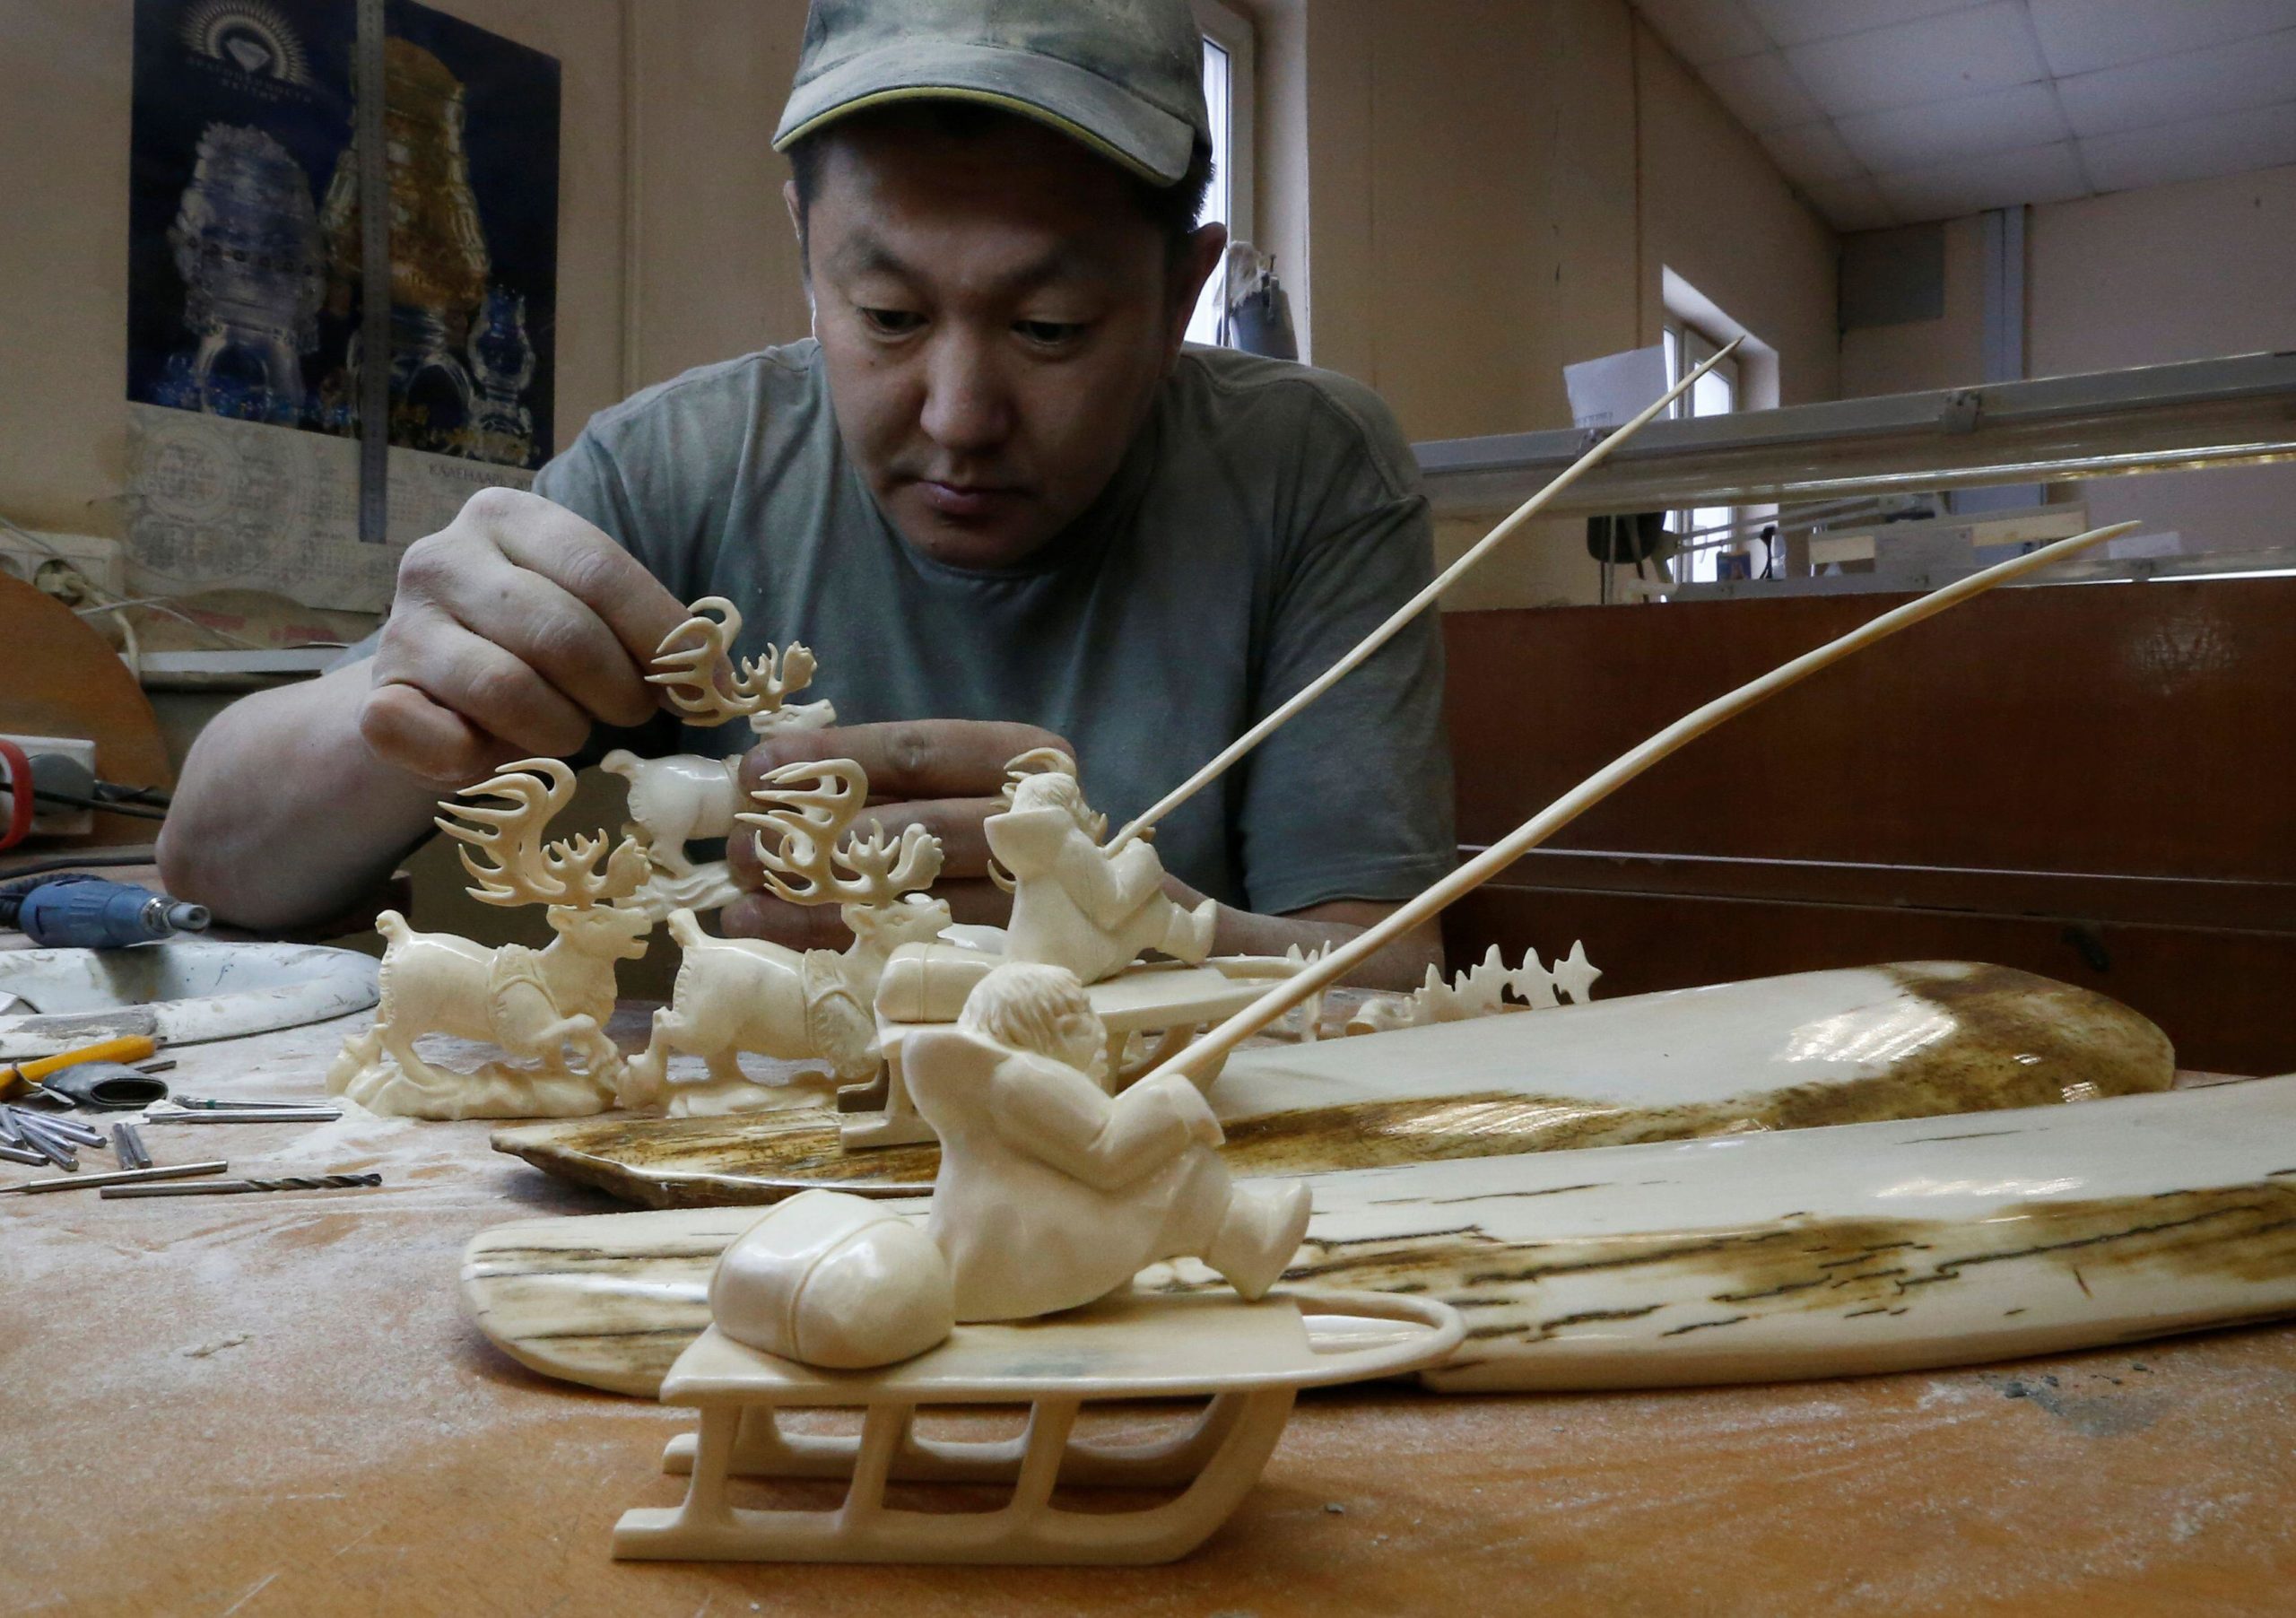 An entrepreneur carves figures from mammoth tusk in Yakutsk. After decades of profit, the mammoth ivory business is in decline in Siberia, mainly due to China’s 2018 ban on elephant ivory. (Image: Sergei Karpukhin / Alamy)